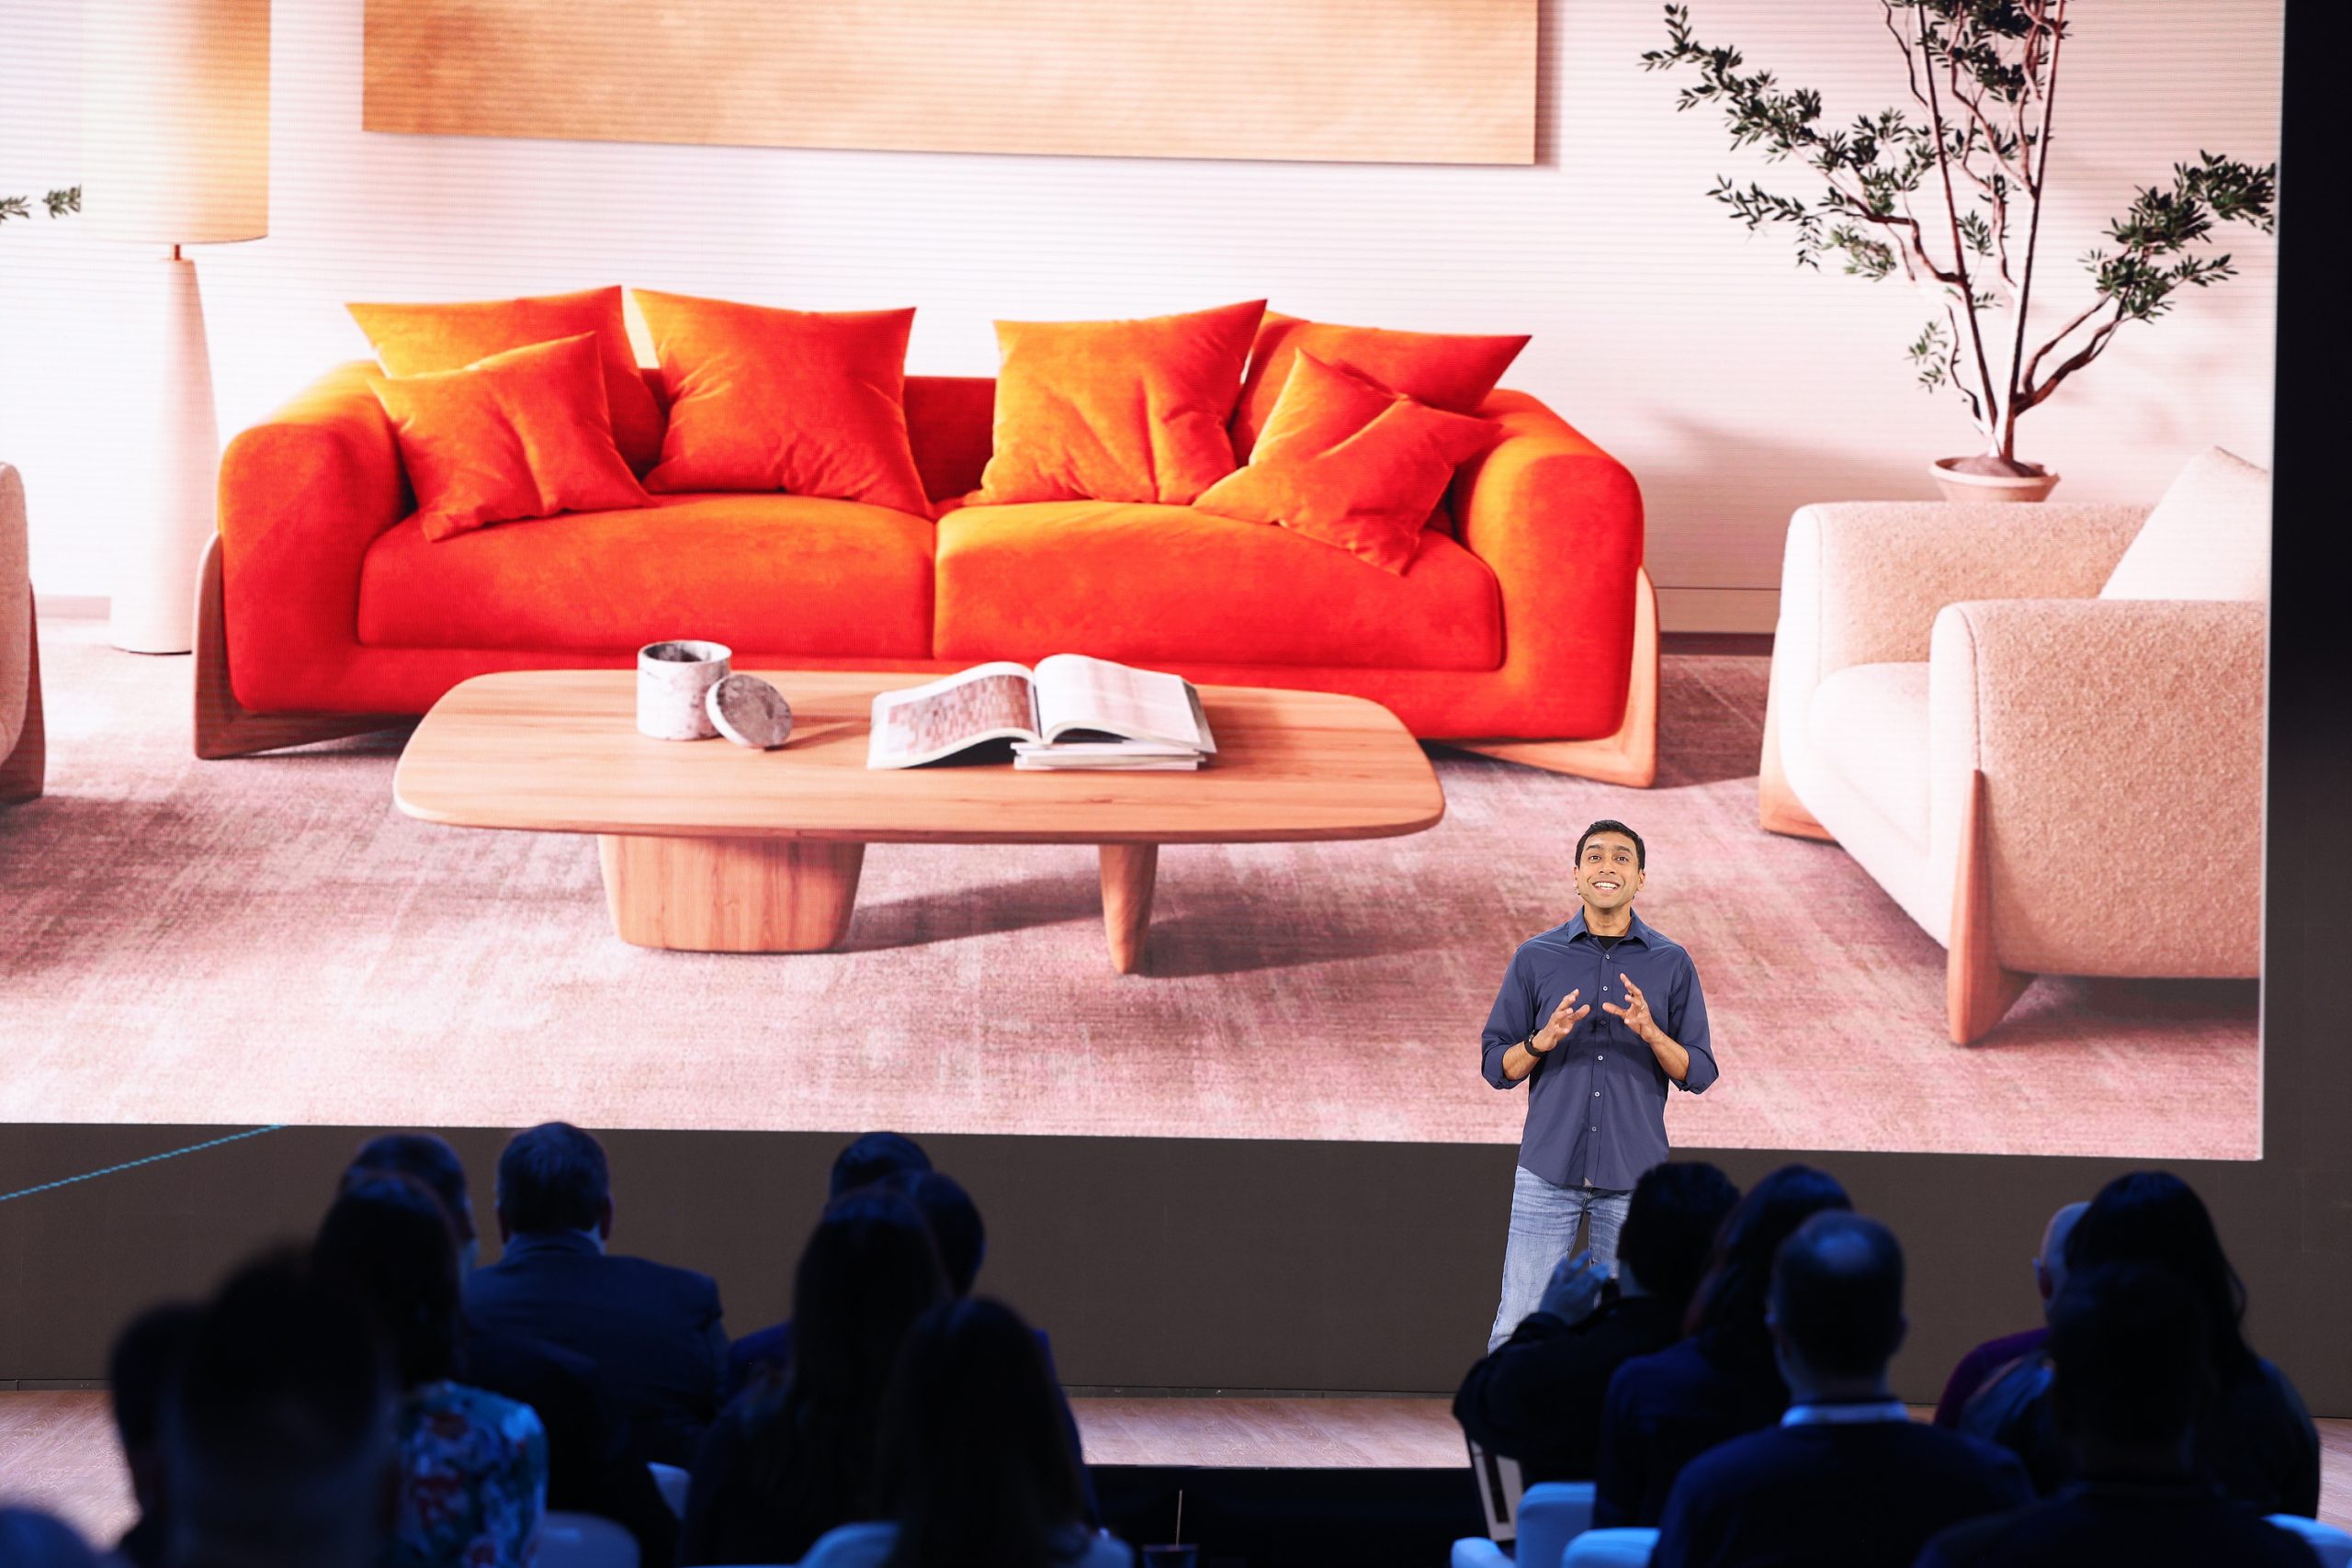 A man standing on stage in front of an audience, with an image of a living room on the screen behind him